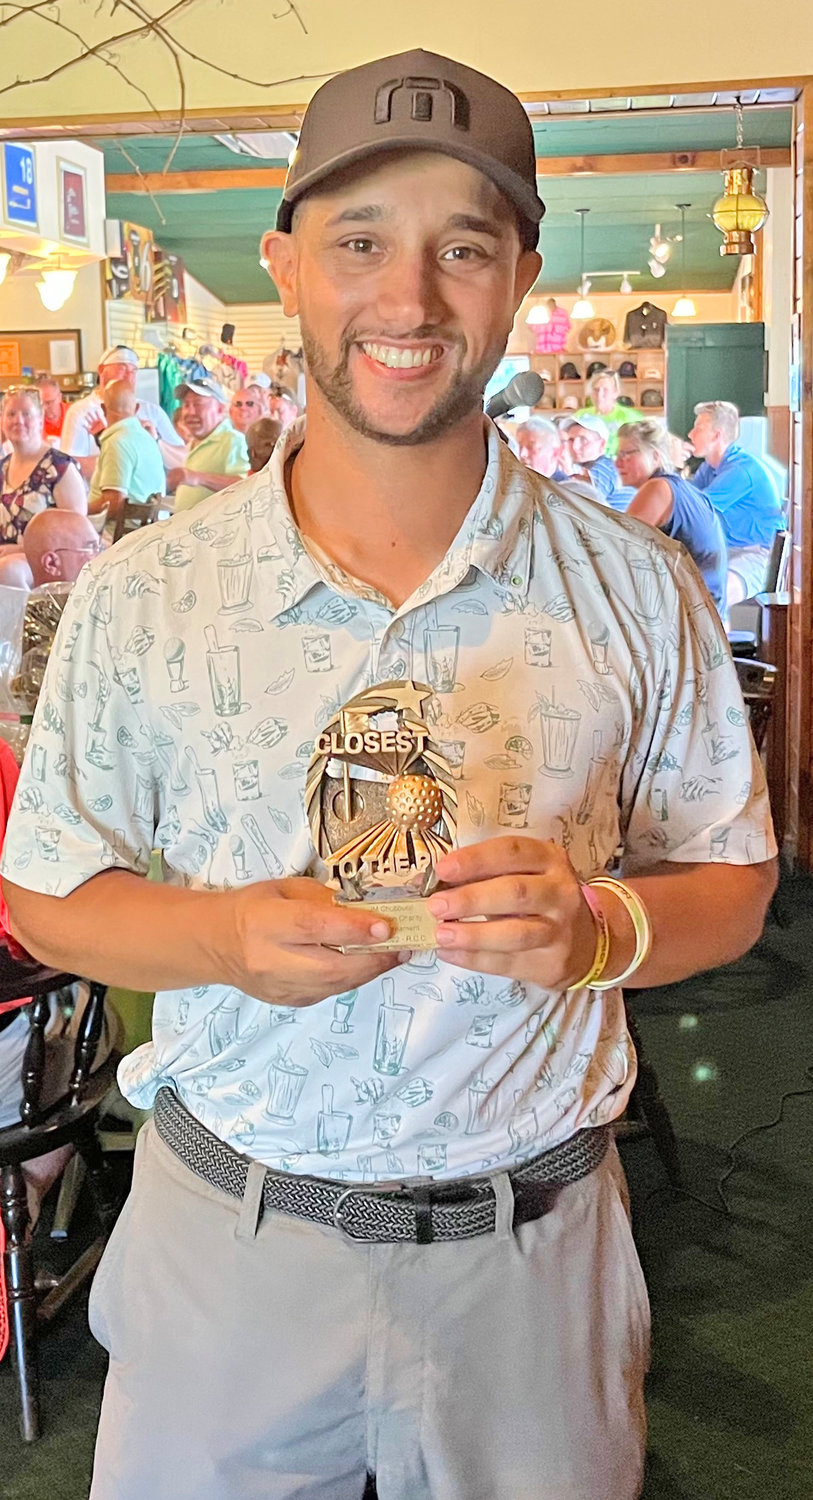 Michael Agosto was the winner of the Closest to the Pin award during the JM Chubbuck Foundation, Inc. annual golf tournament held Aug. 6 at Rome Country Club.